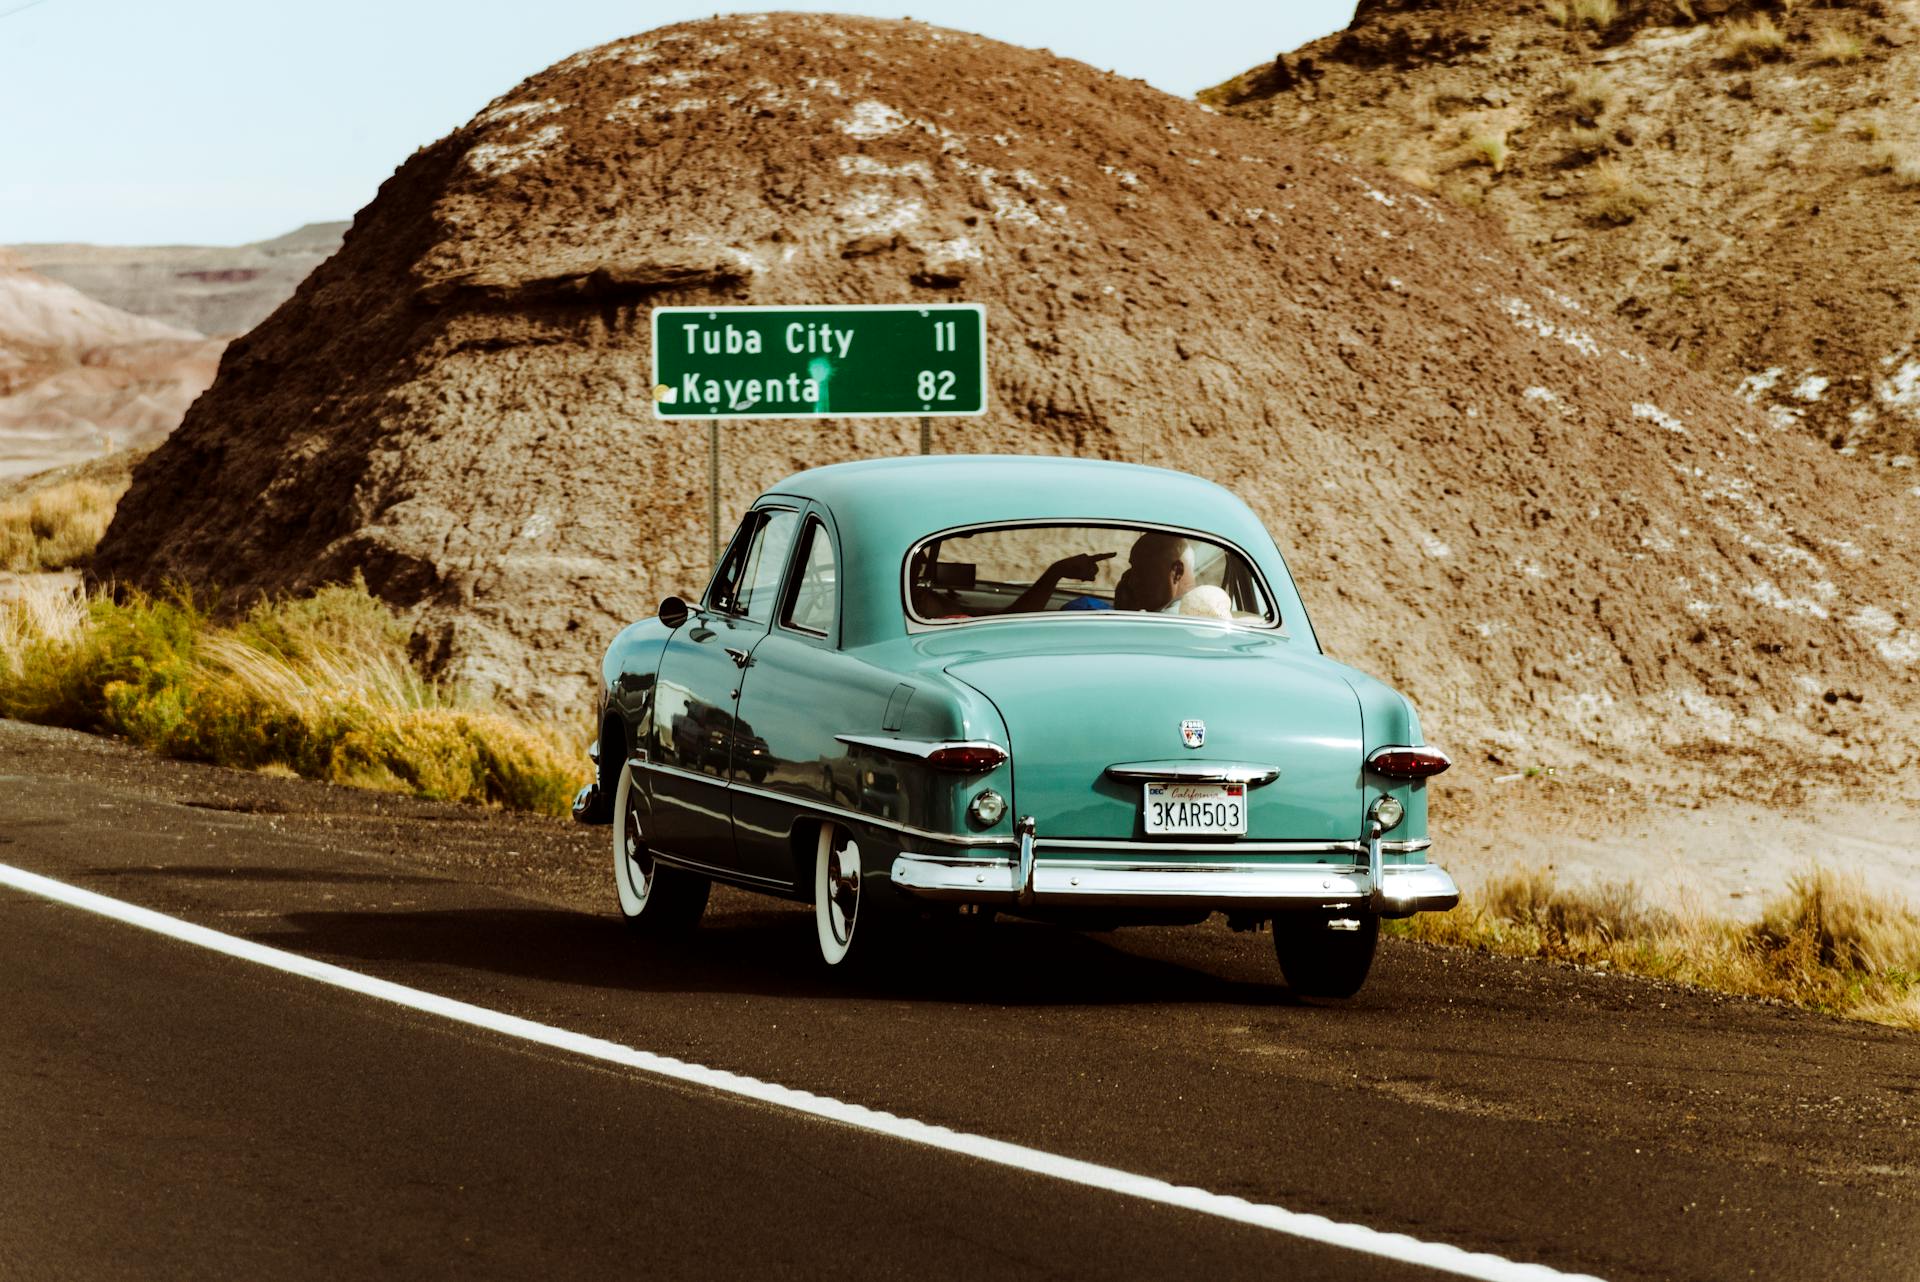 Key Things You Should Always Do Before Going on a Long Road Trip